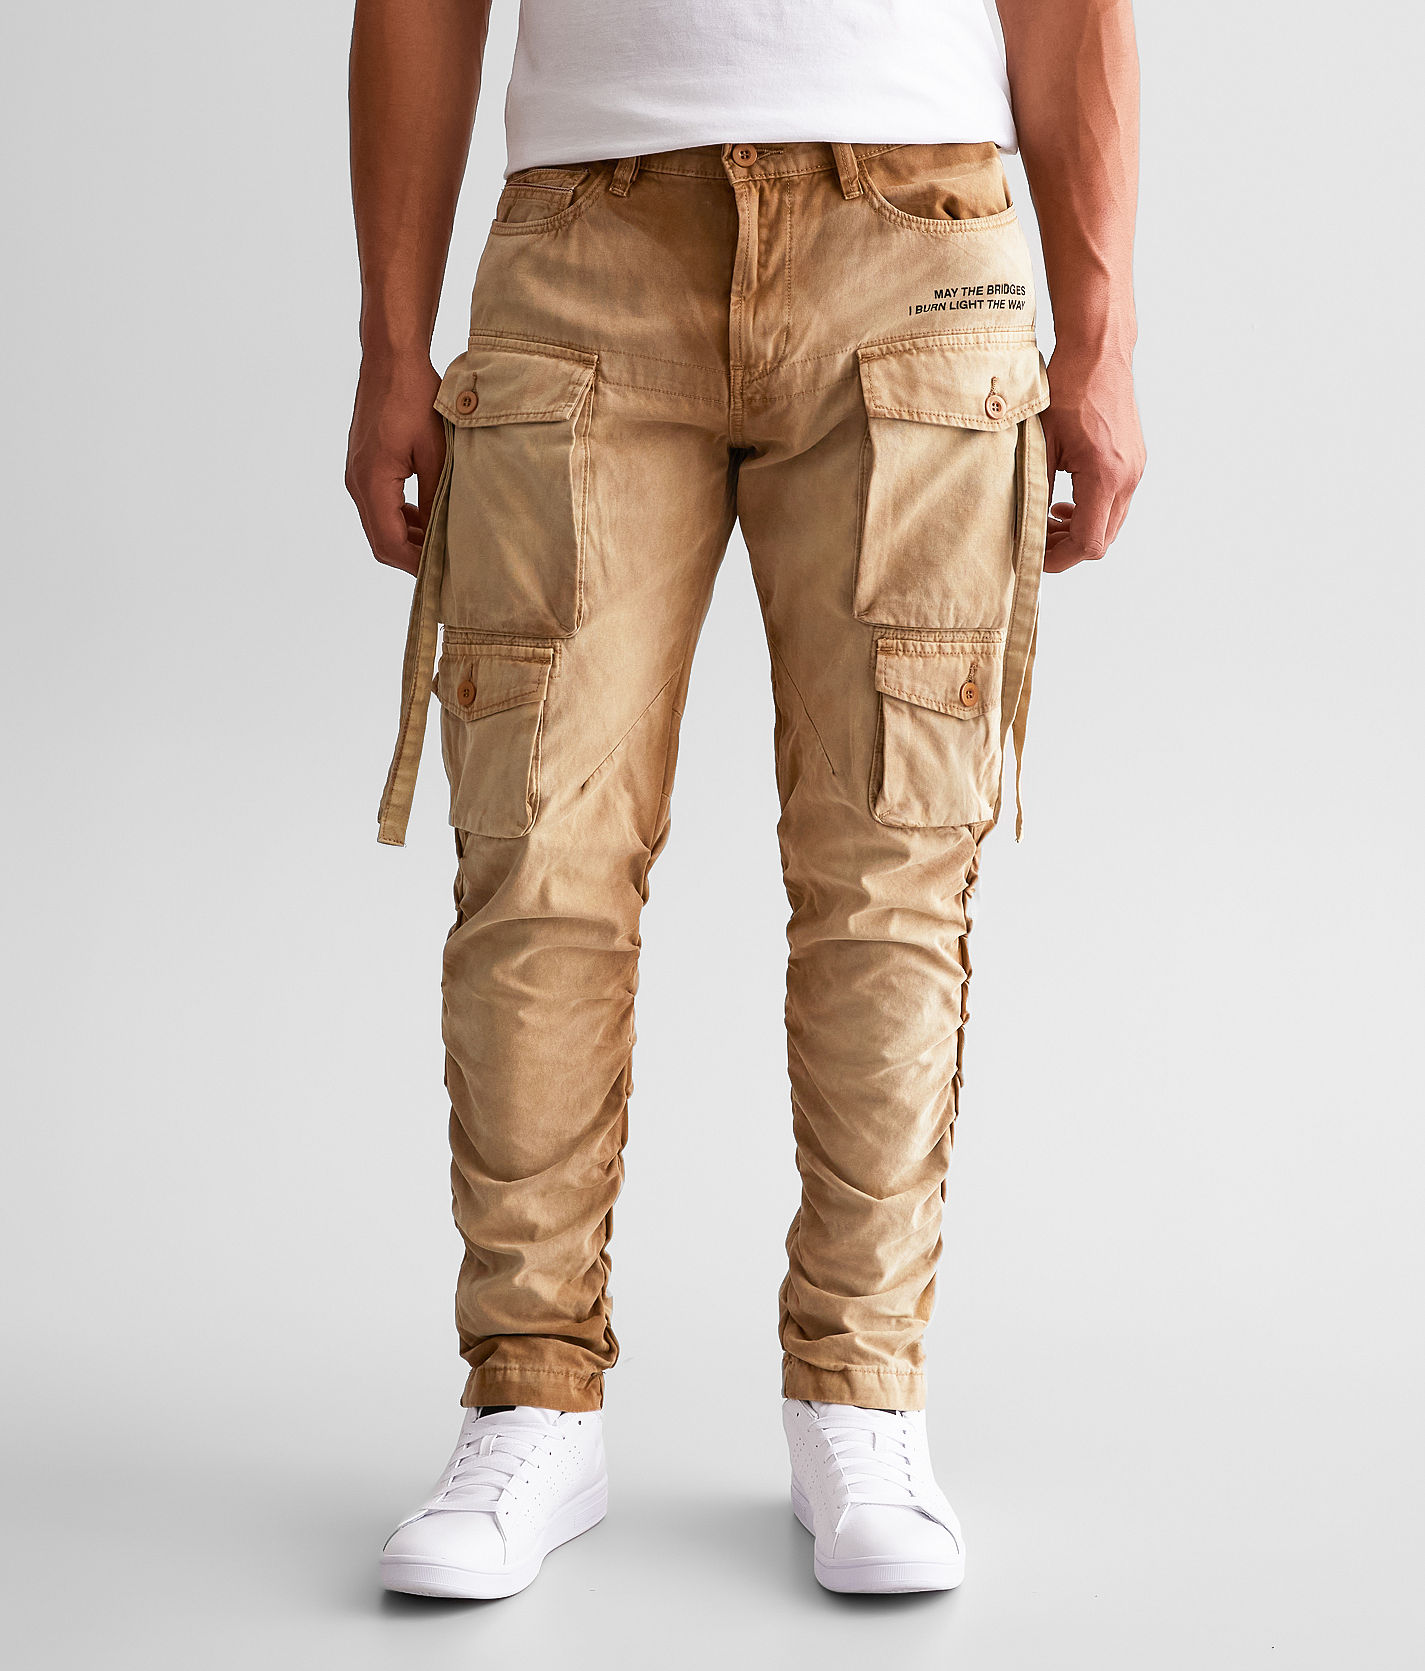 The FORBEMK pants have gotten a bit of a dirtbag cult following